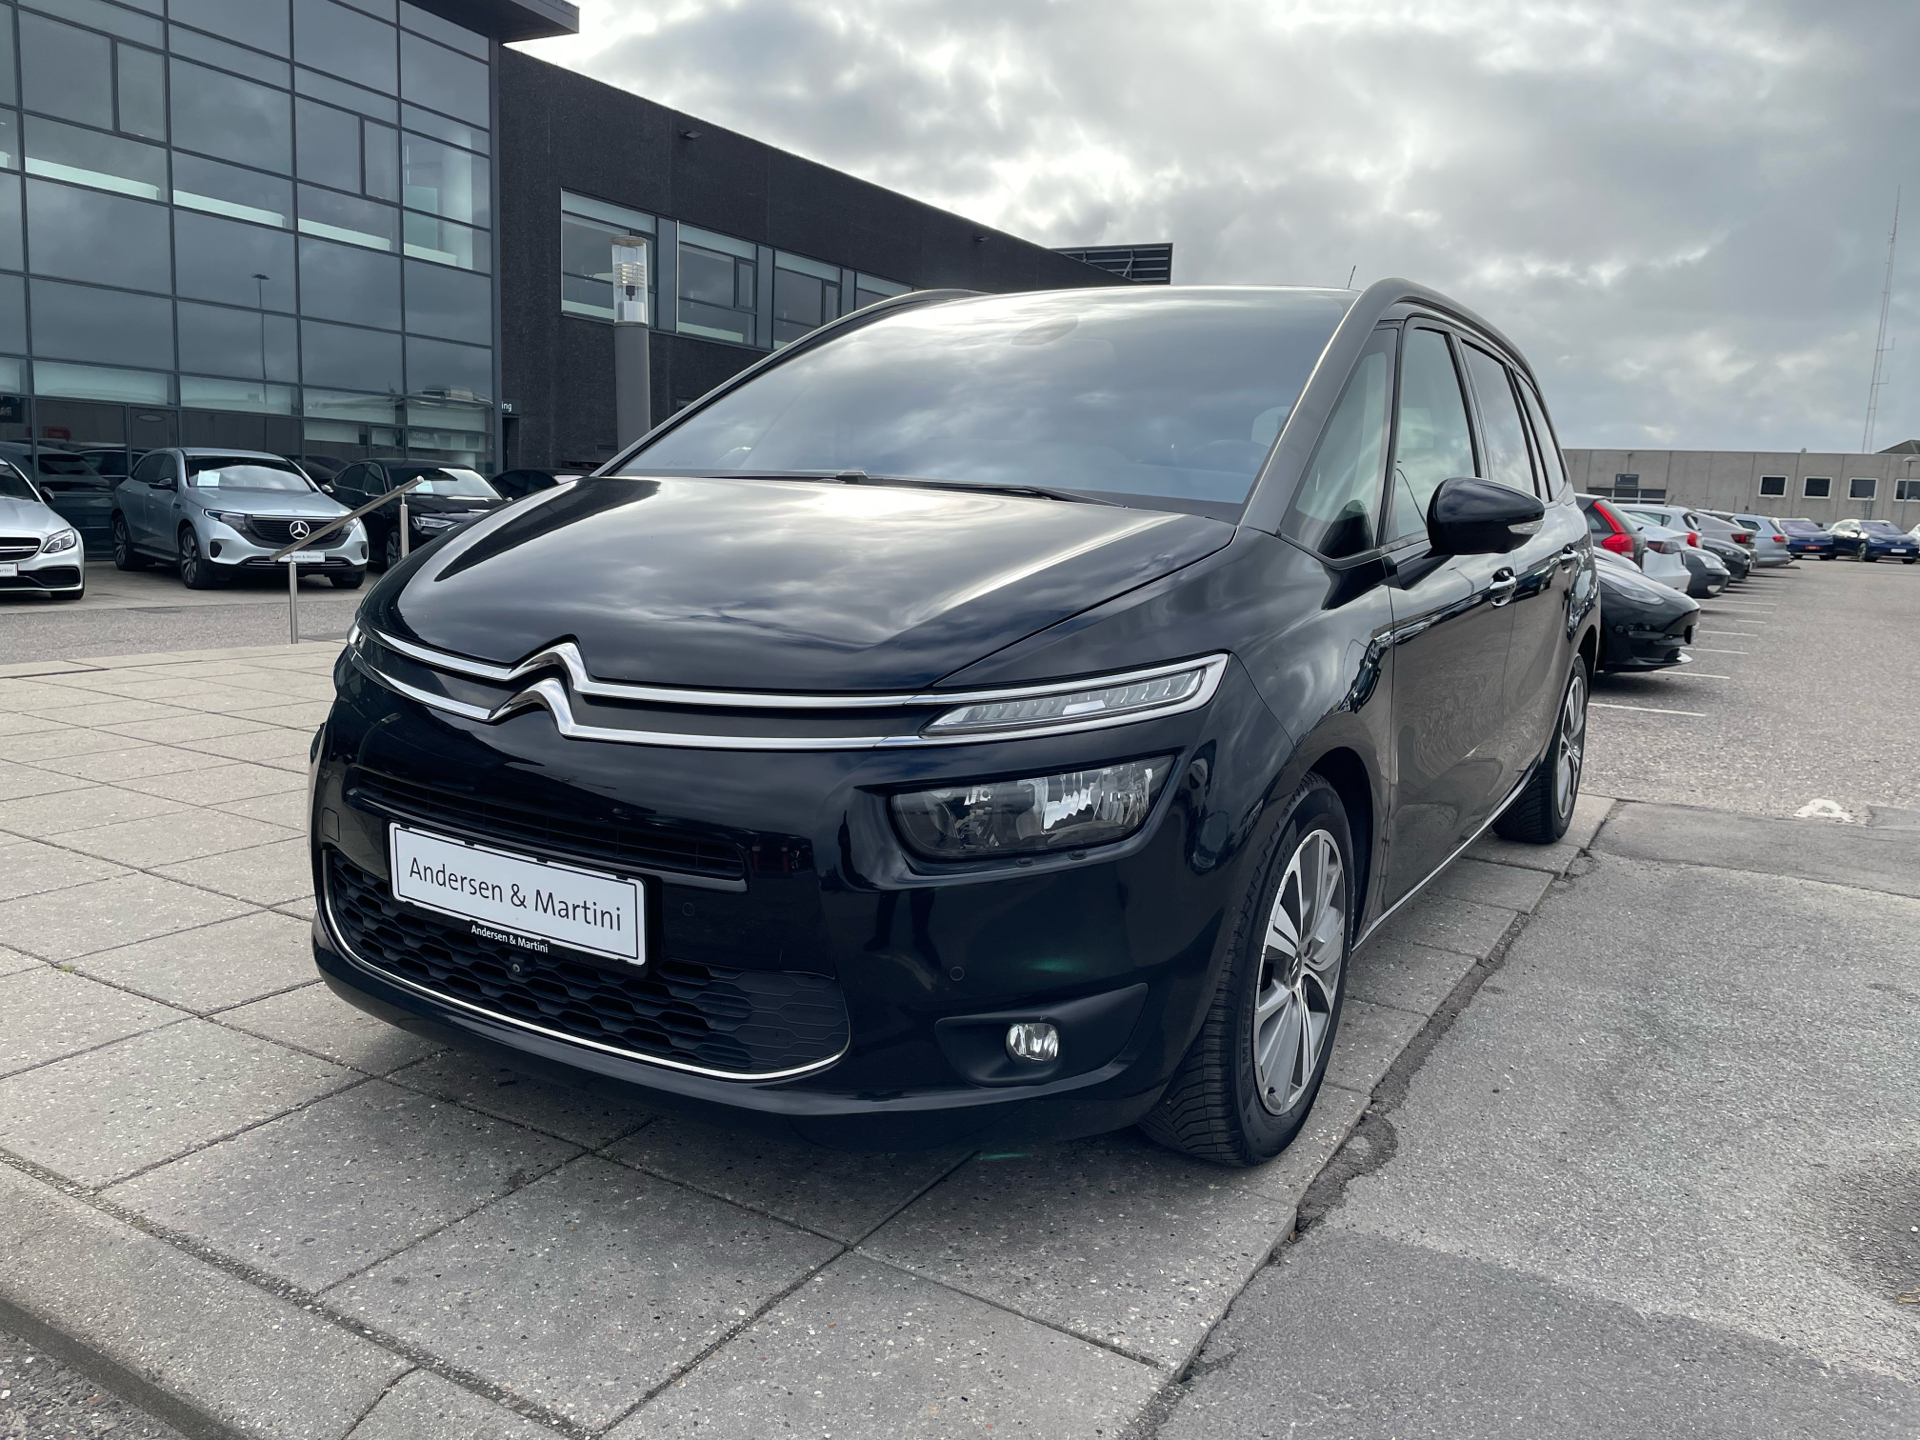 Citroën Grand C4 Picasso THP Exclusive EAT6 start/stop 165HK 6g